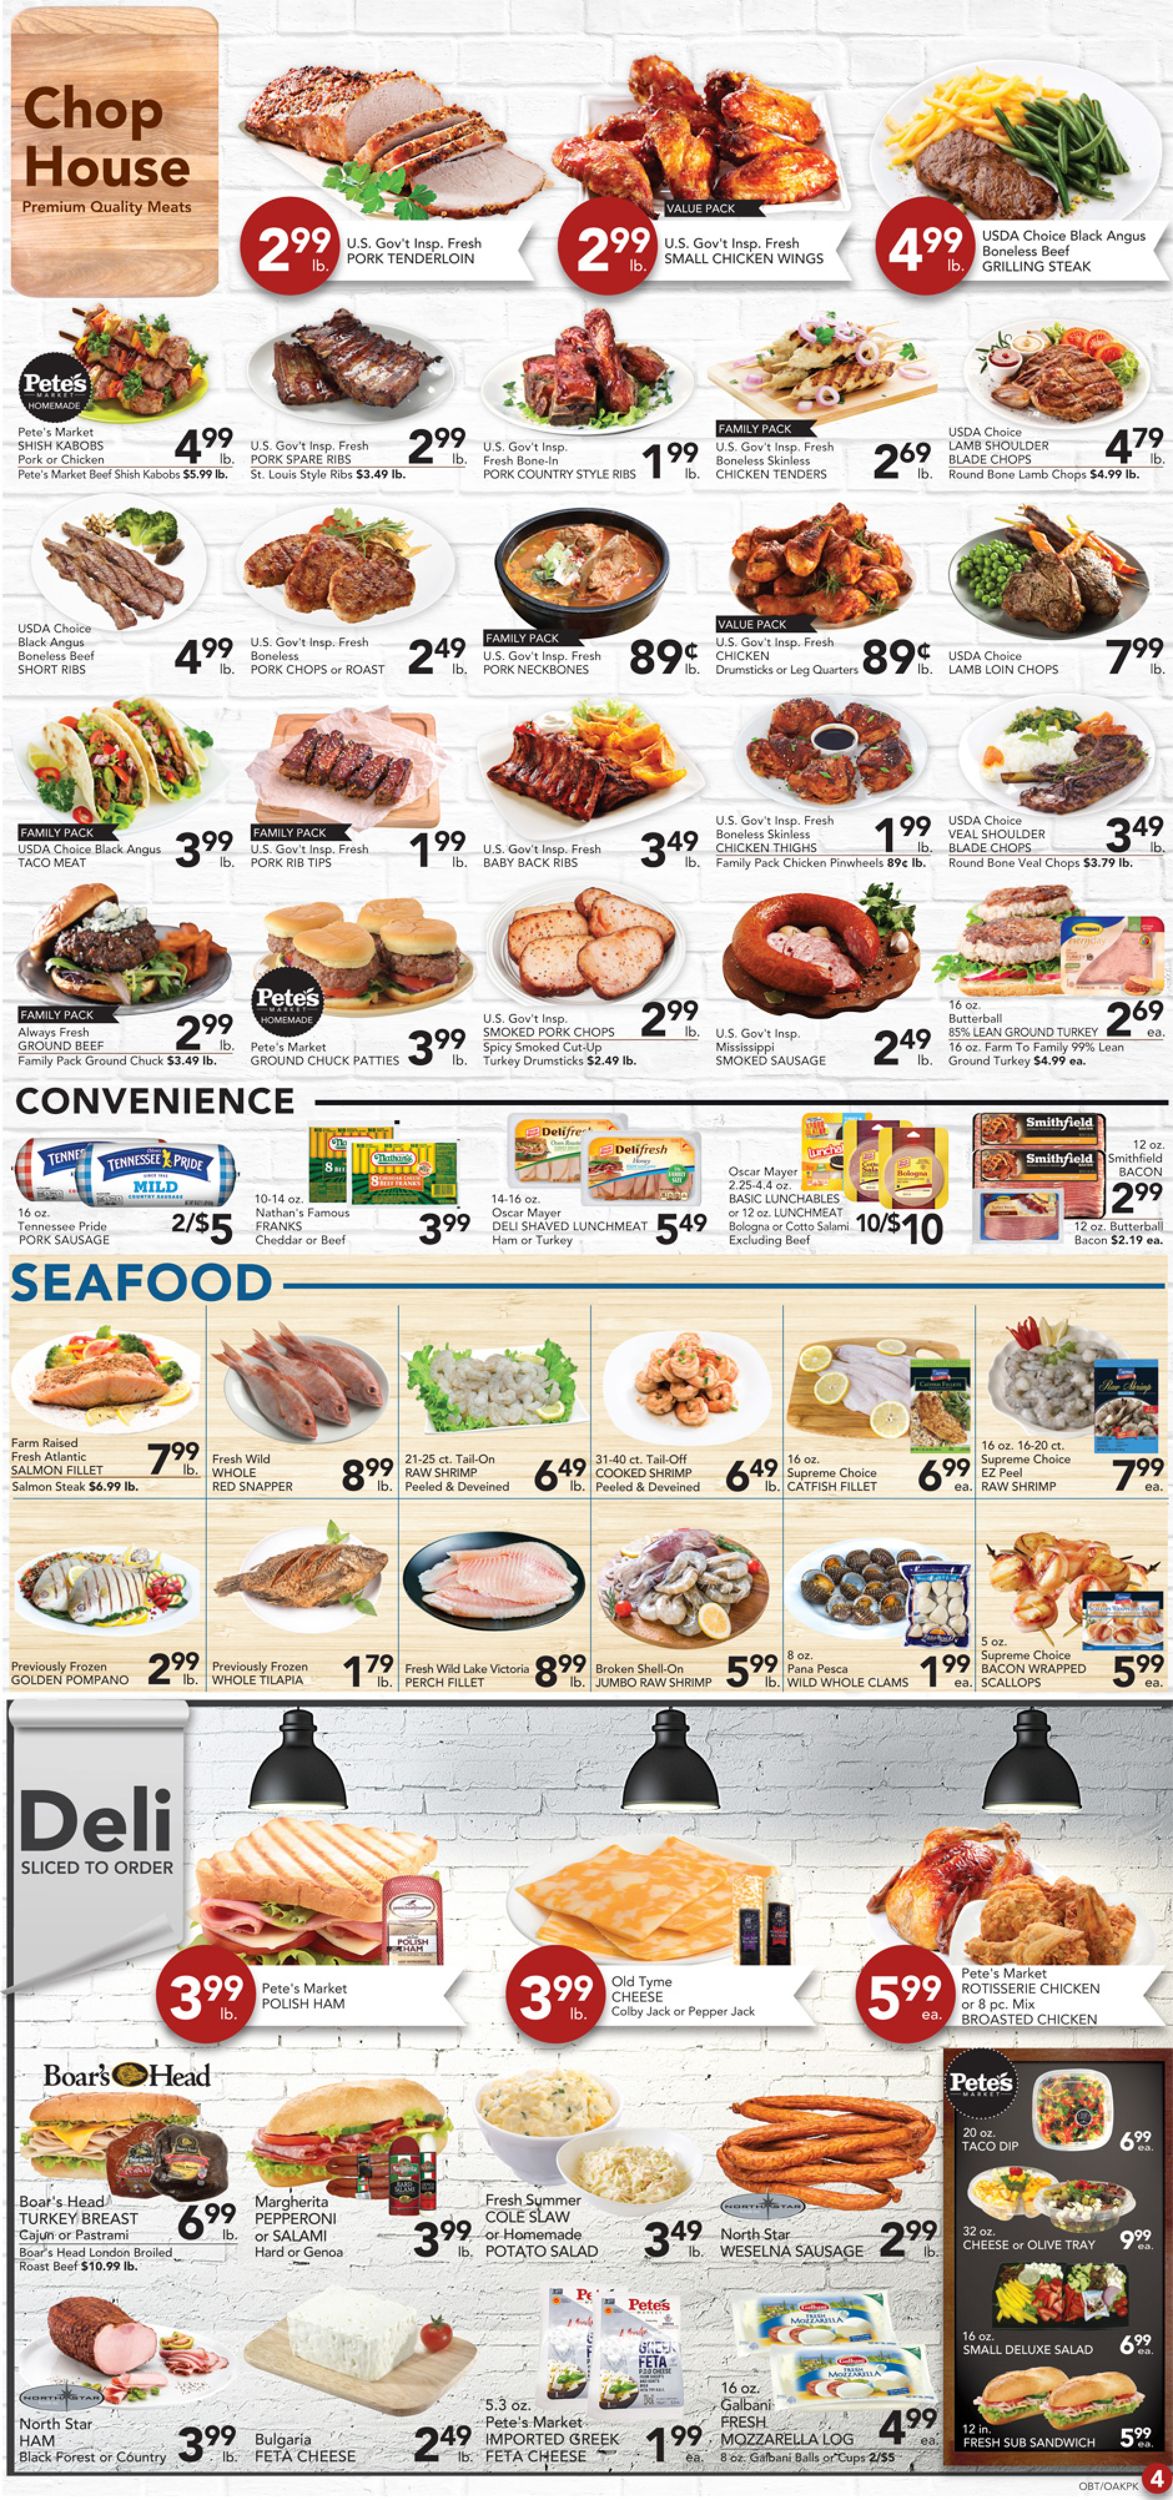 Catalogue Pete's Fresh Market from 07/10/2019